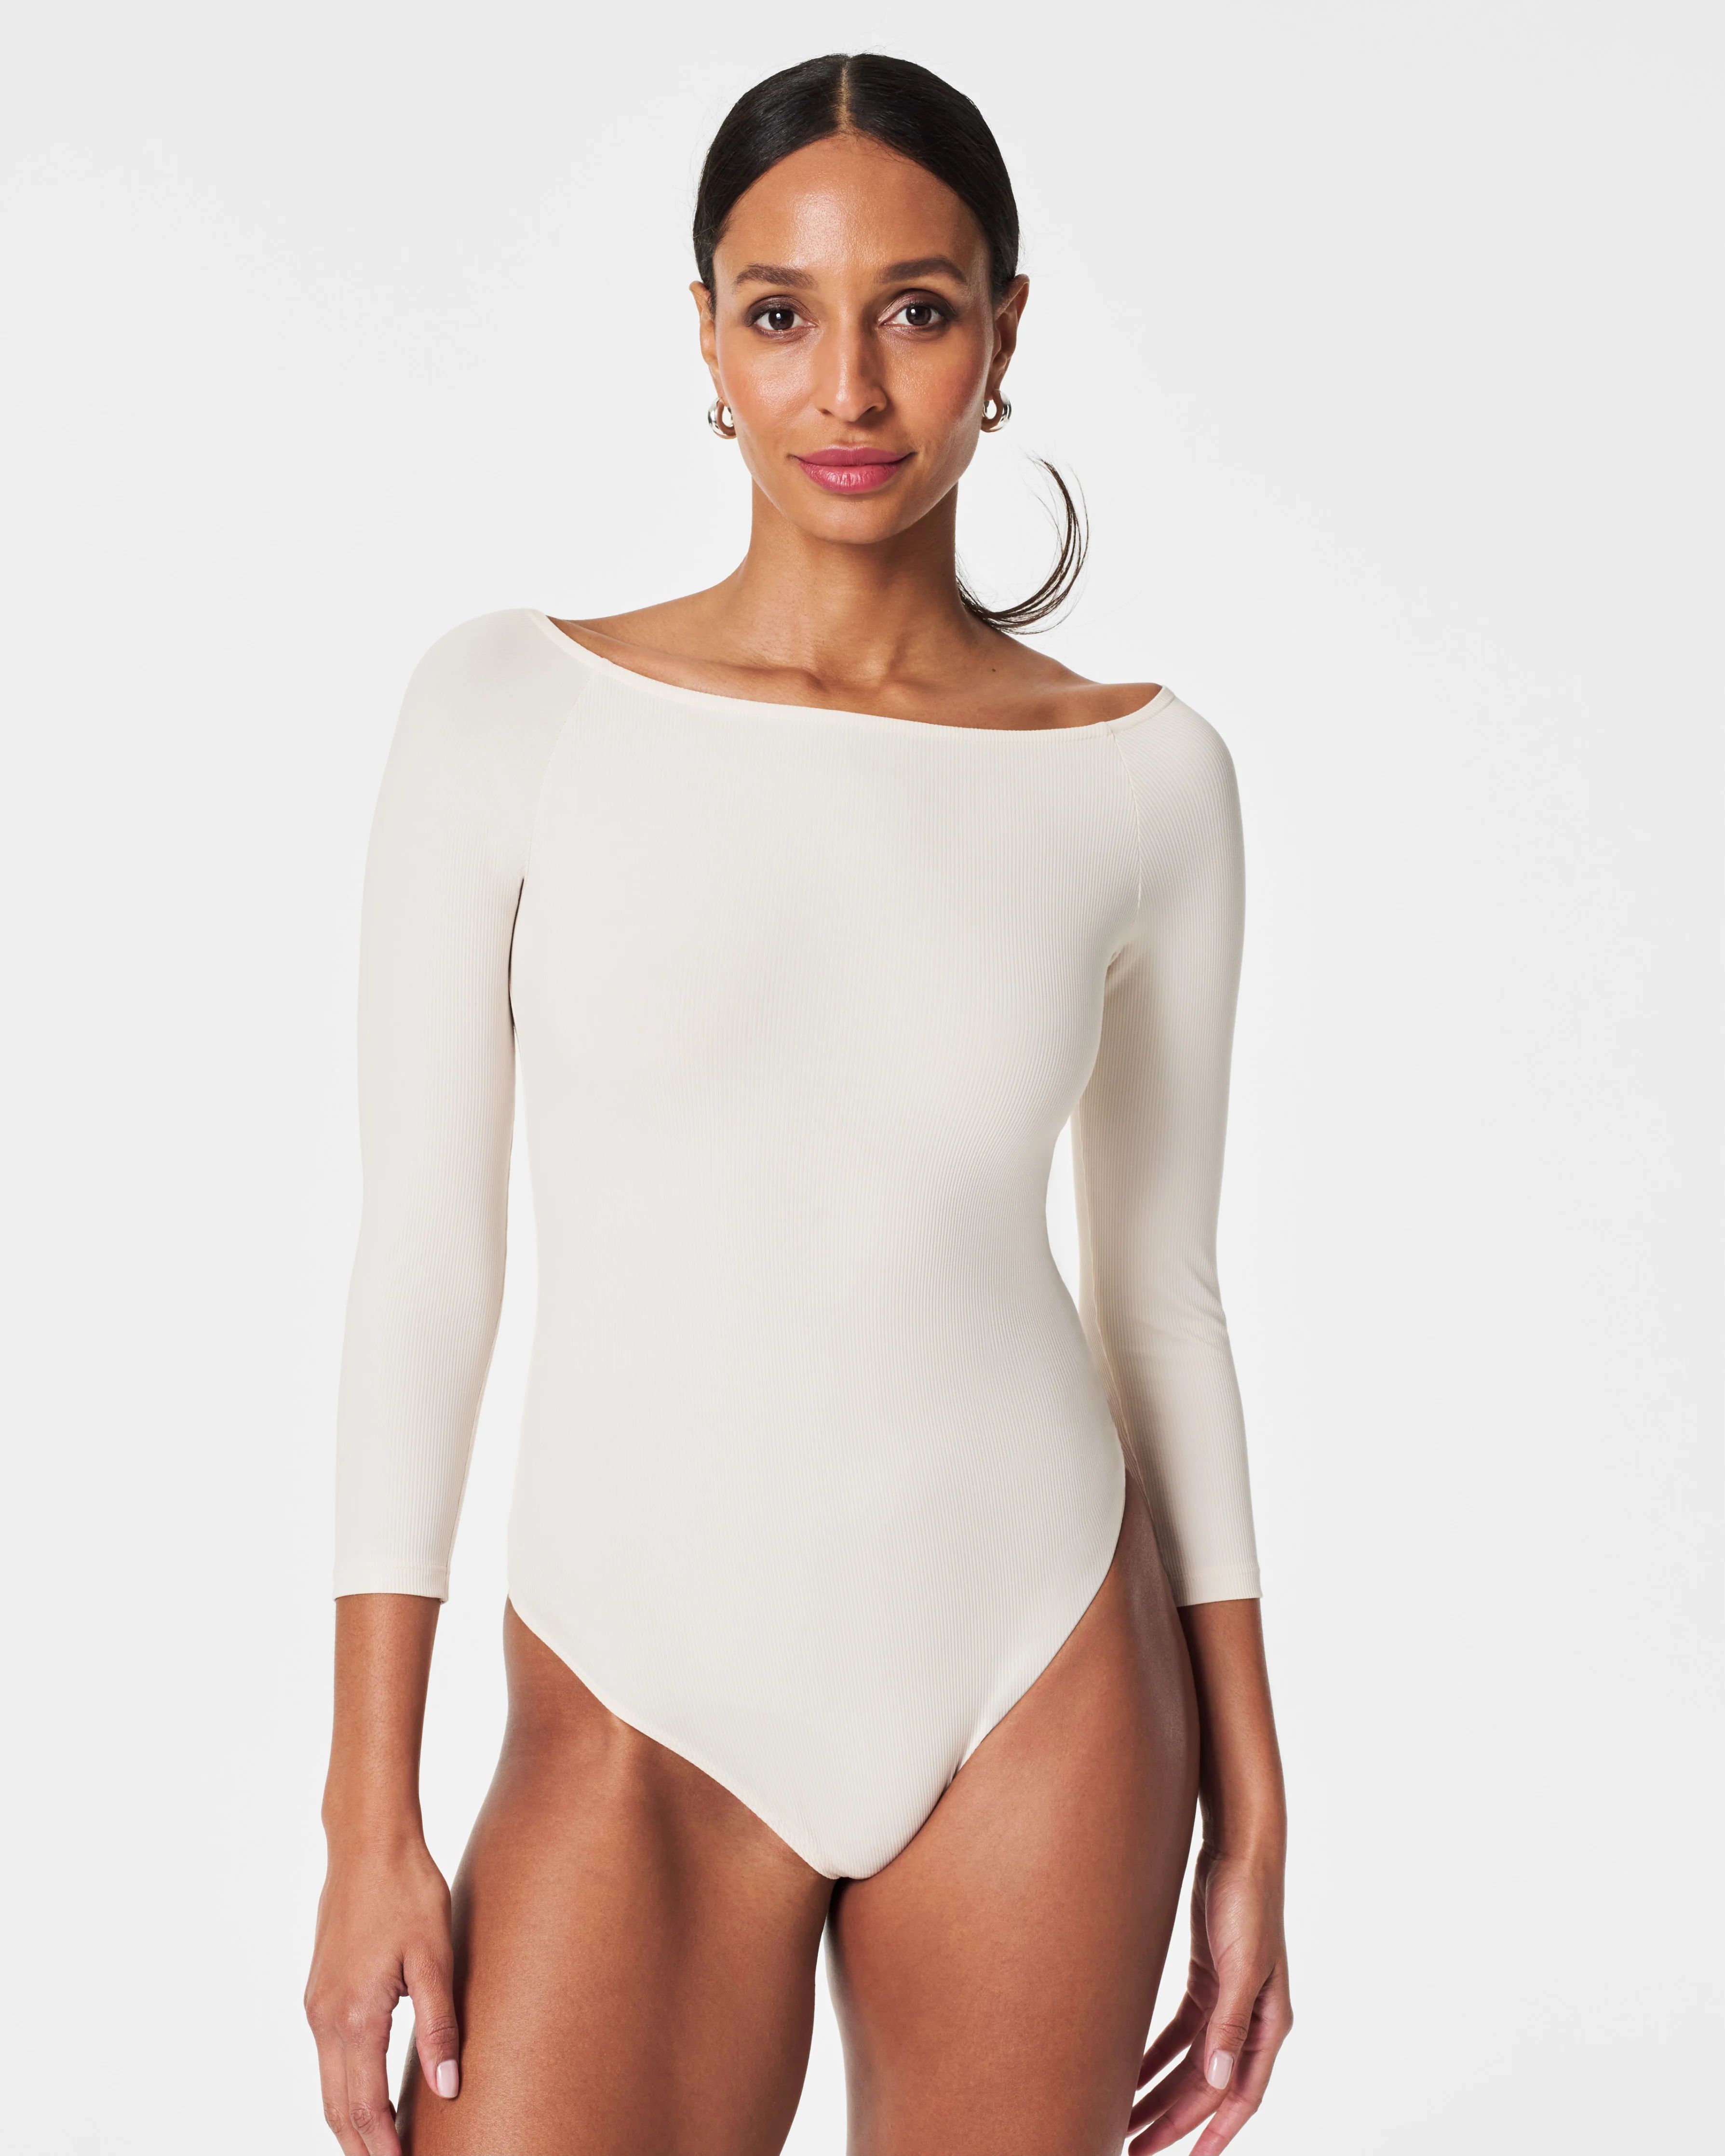 Suit Yourself Boat Neck Ribbed Bodysuit | Spanx